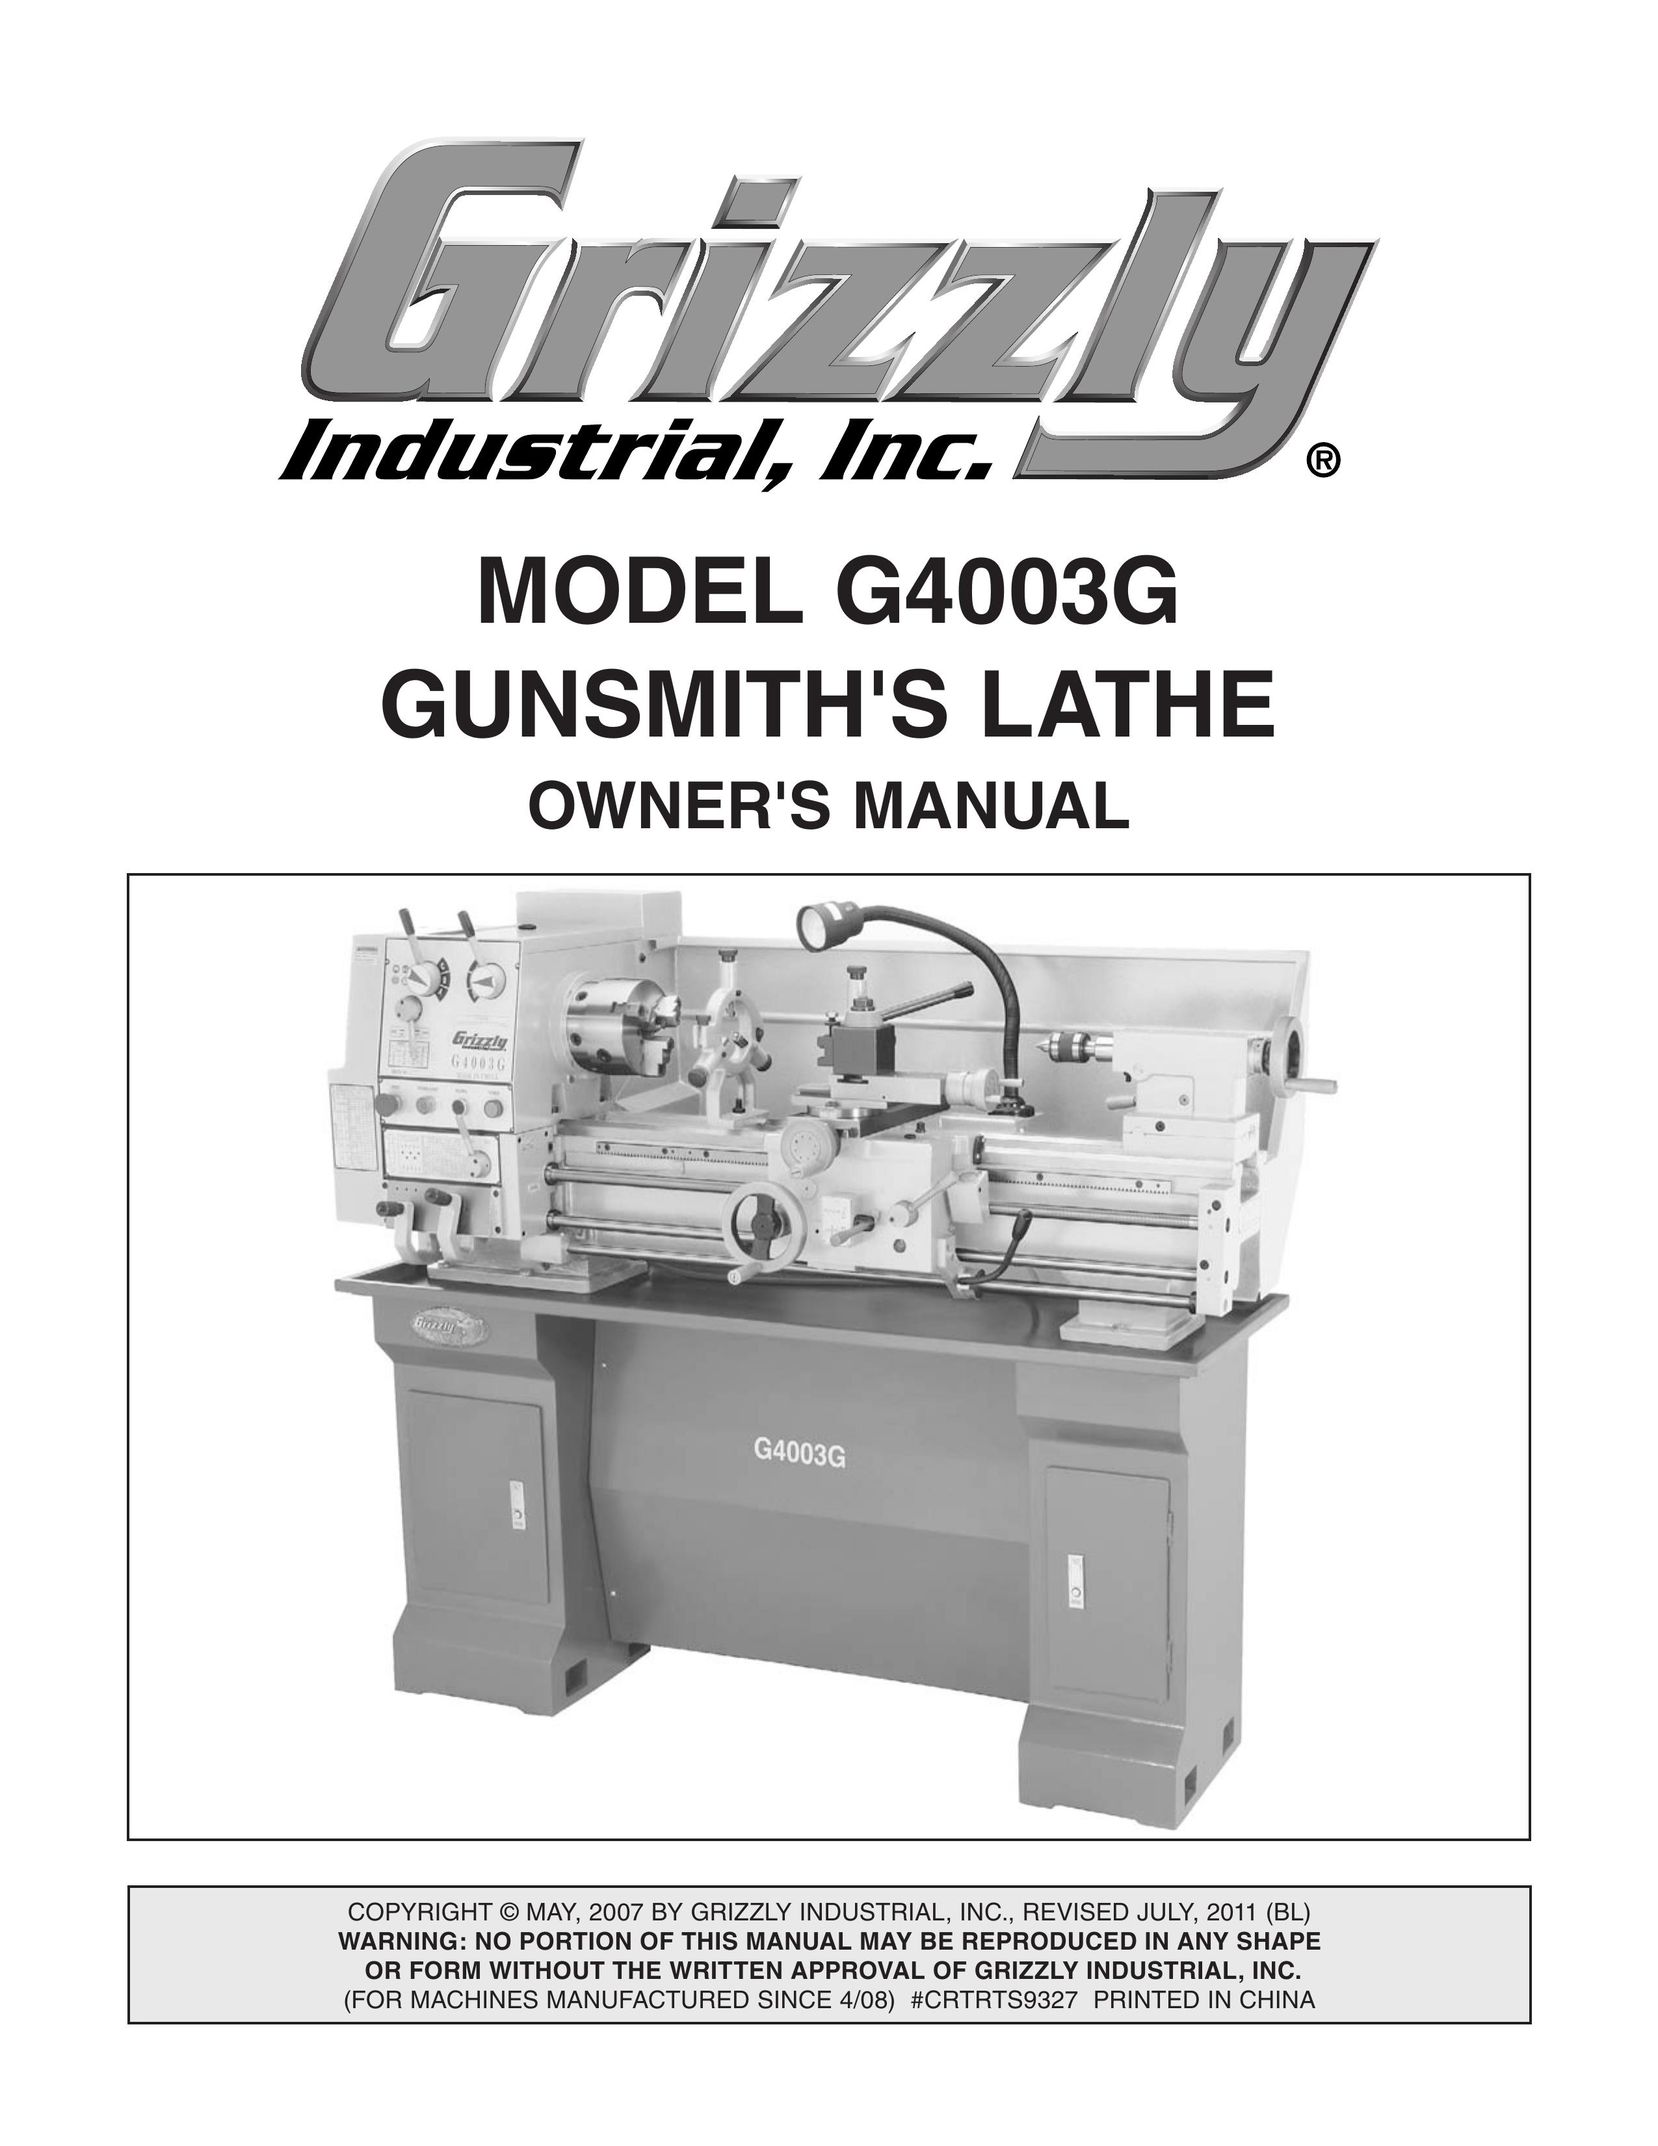 Grizzly G4003G Lathe User Manual